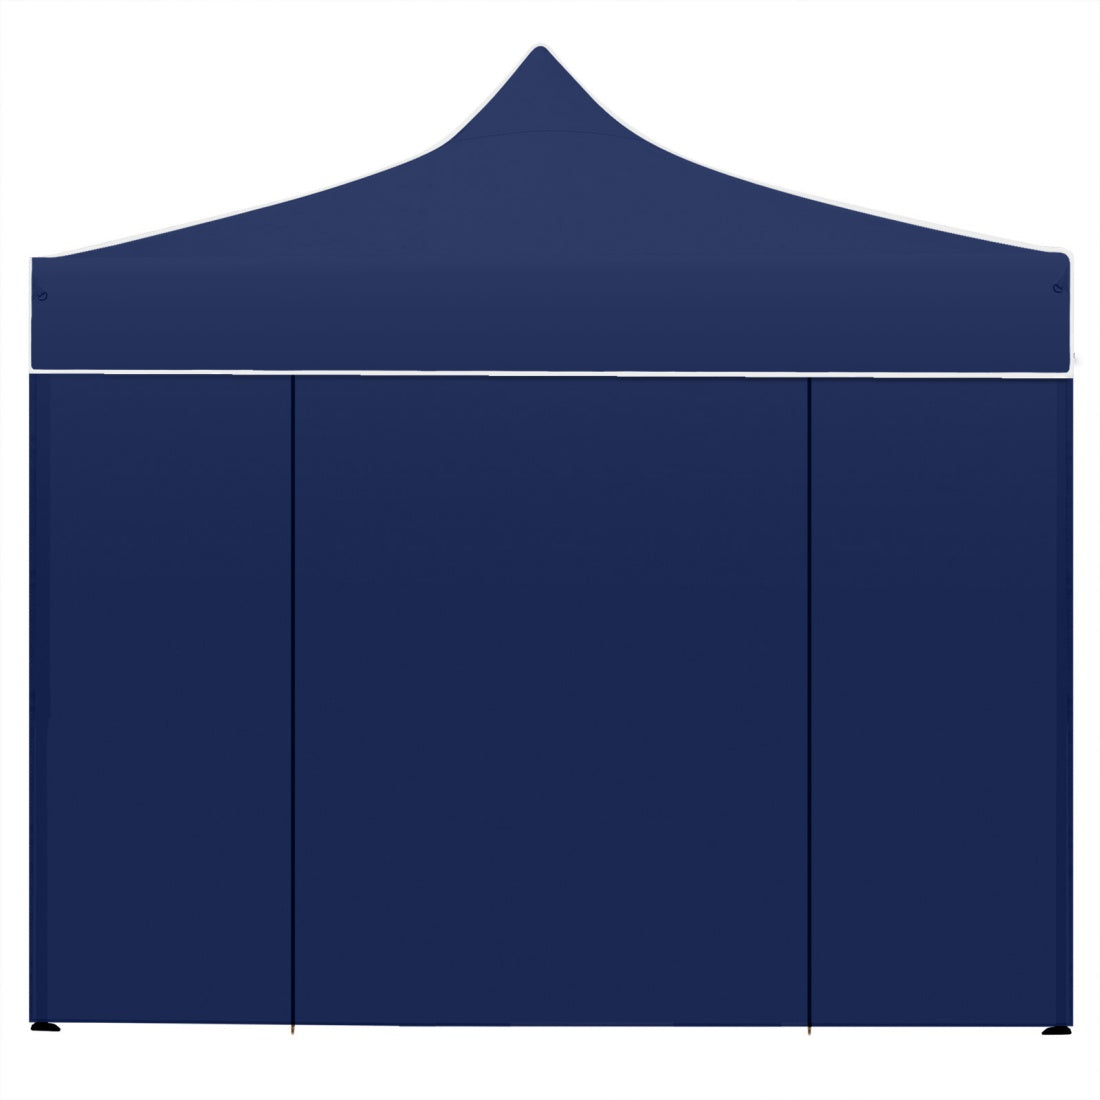 Navy 3M x 3M Folding Gazebo Perfect Oasis Outdoor Market Party Marquee